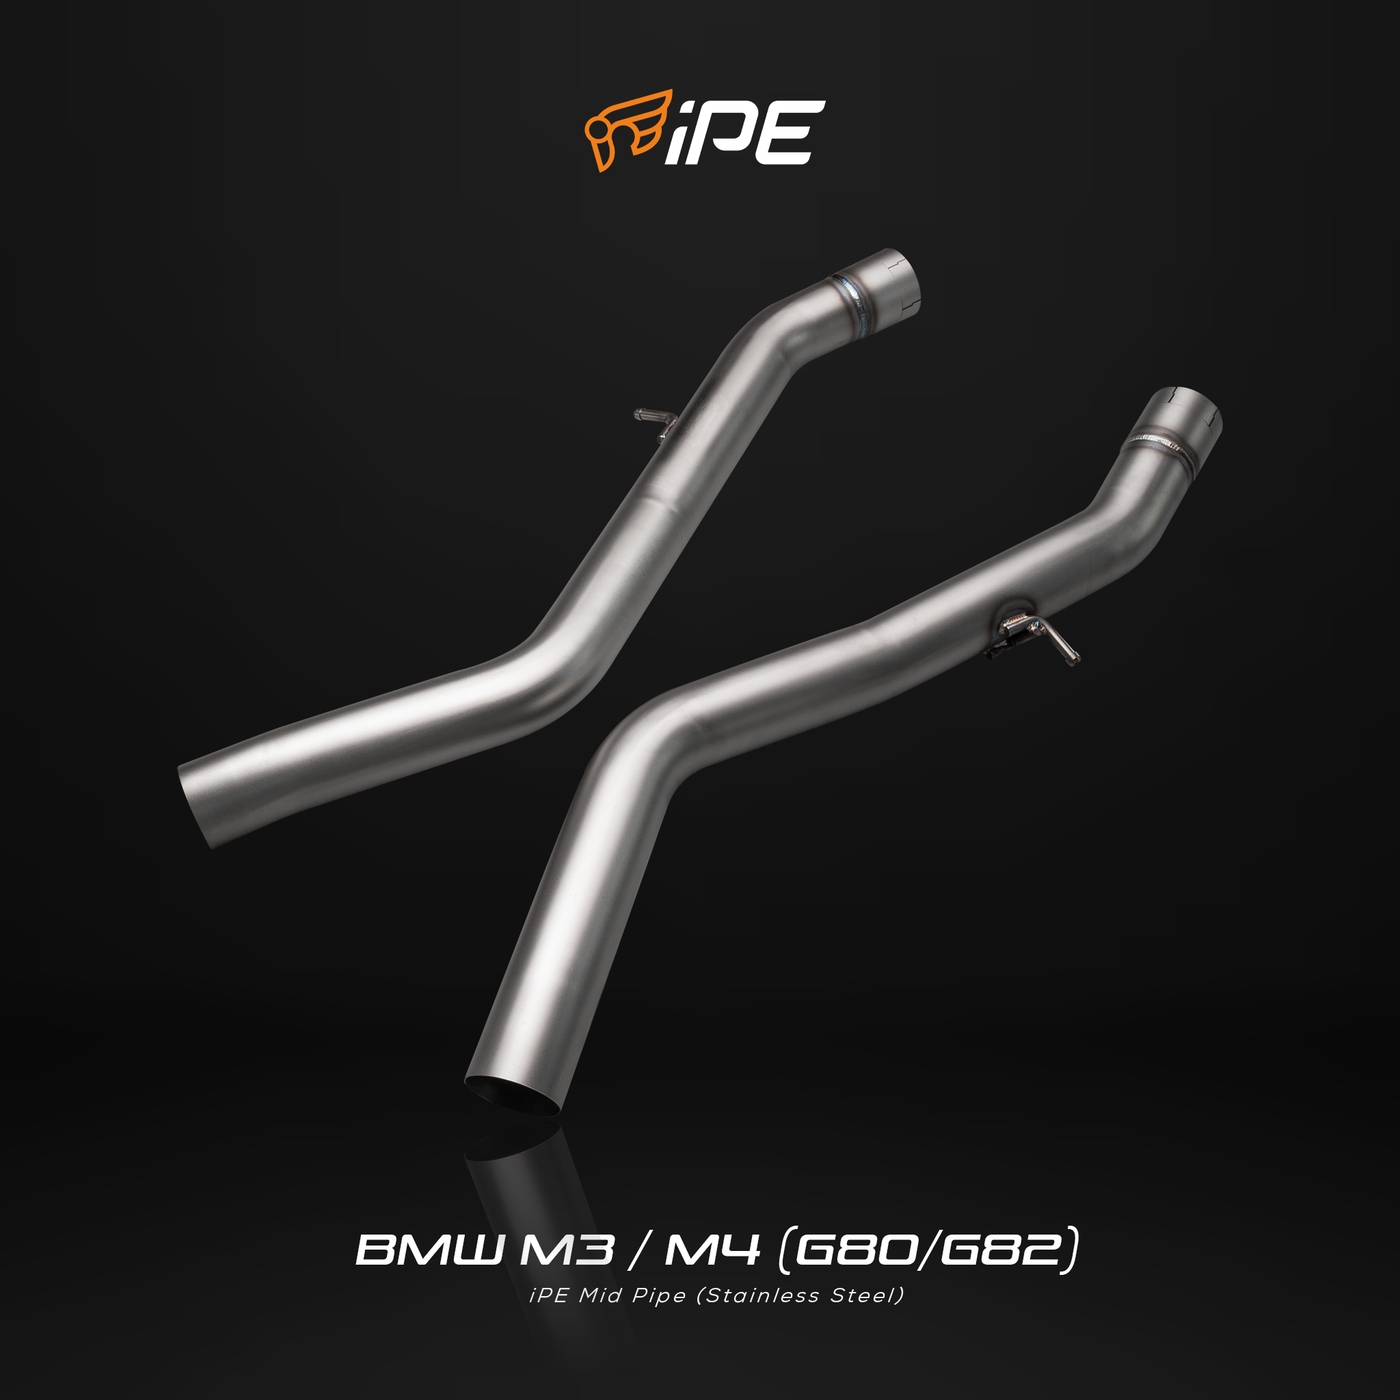 BMW G80/G82 M3/M4 Exhaust System - Mid Pipe - Stainless Steel